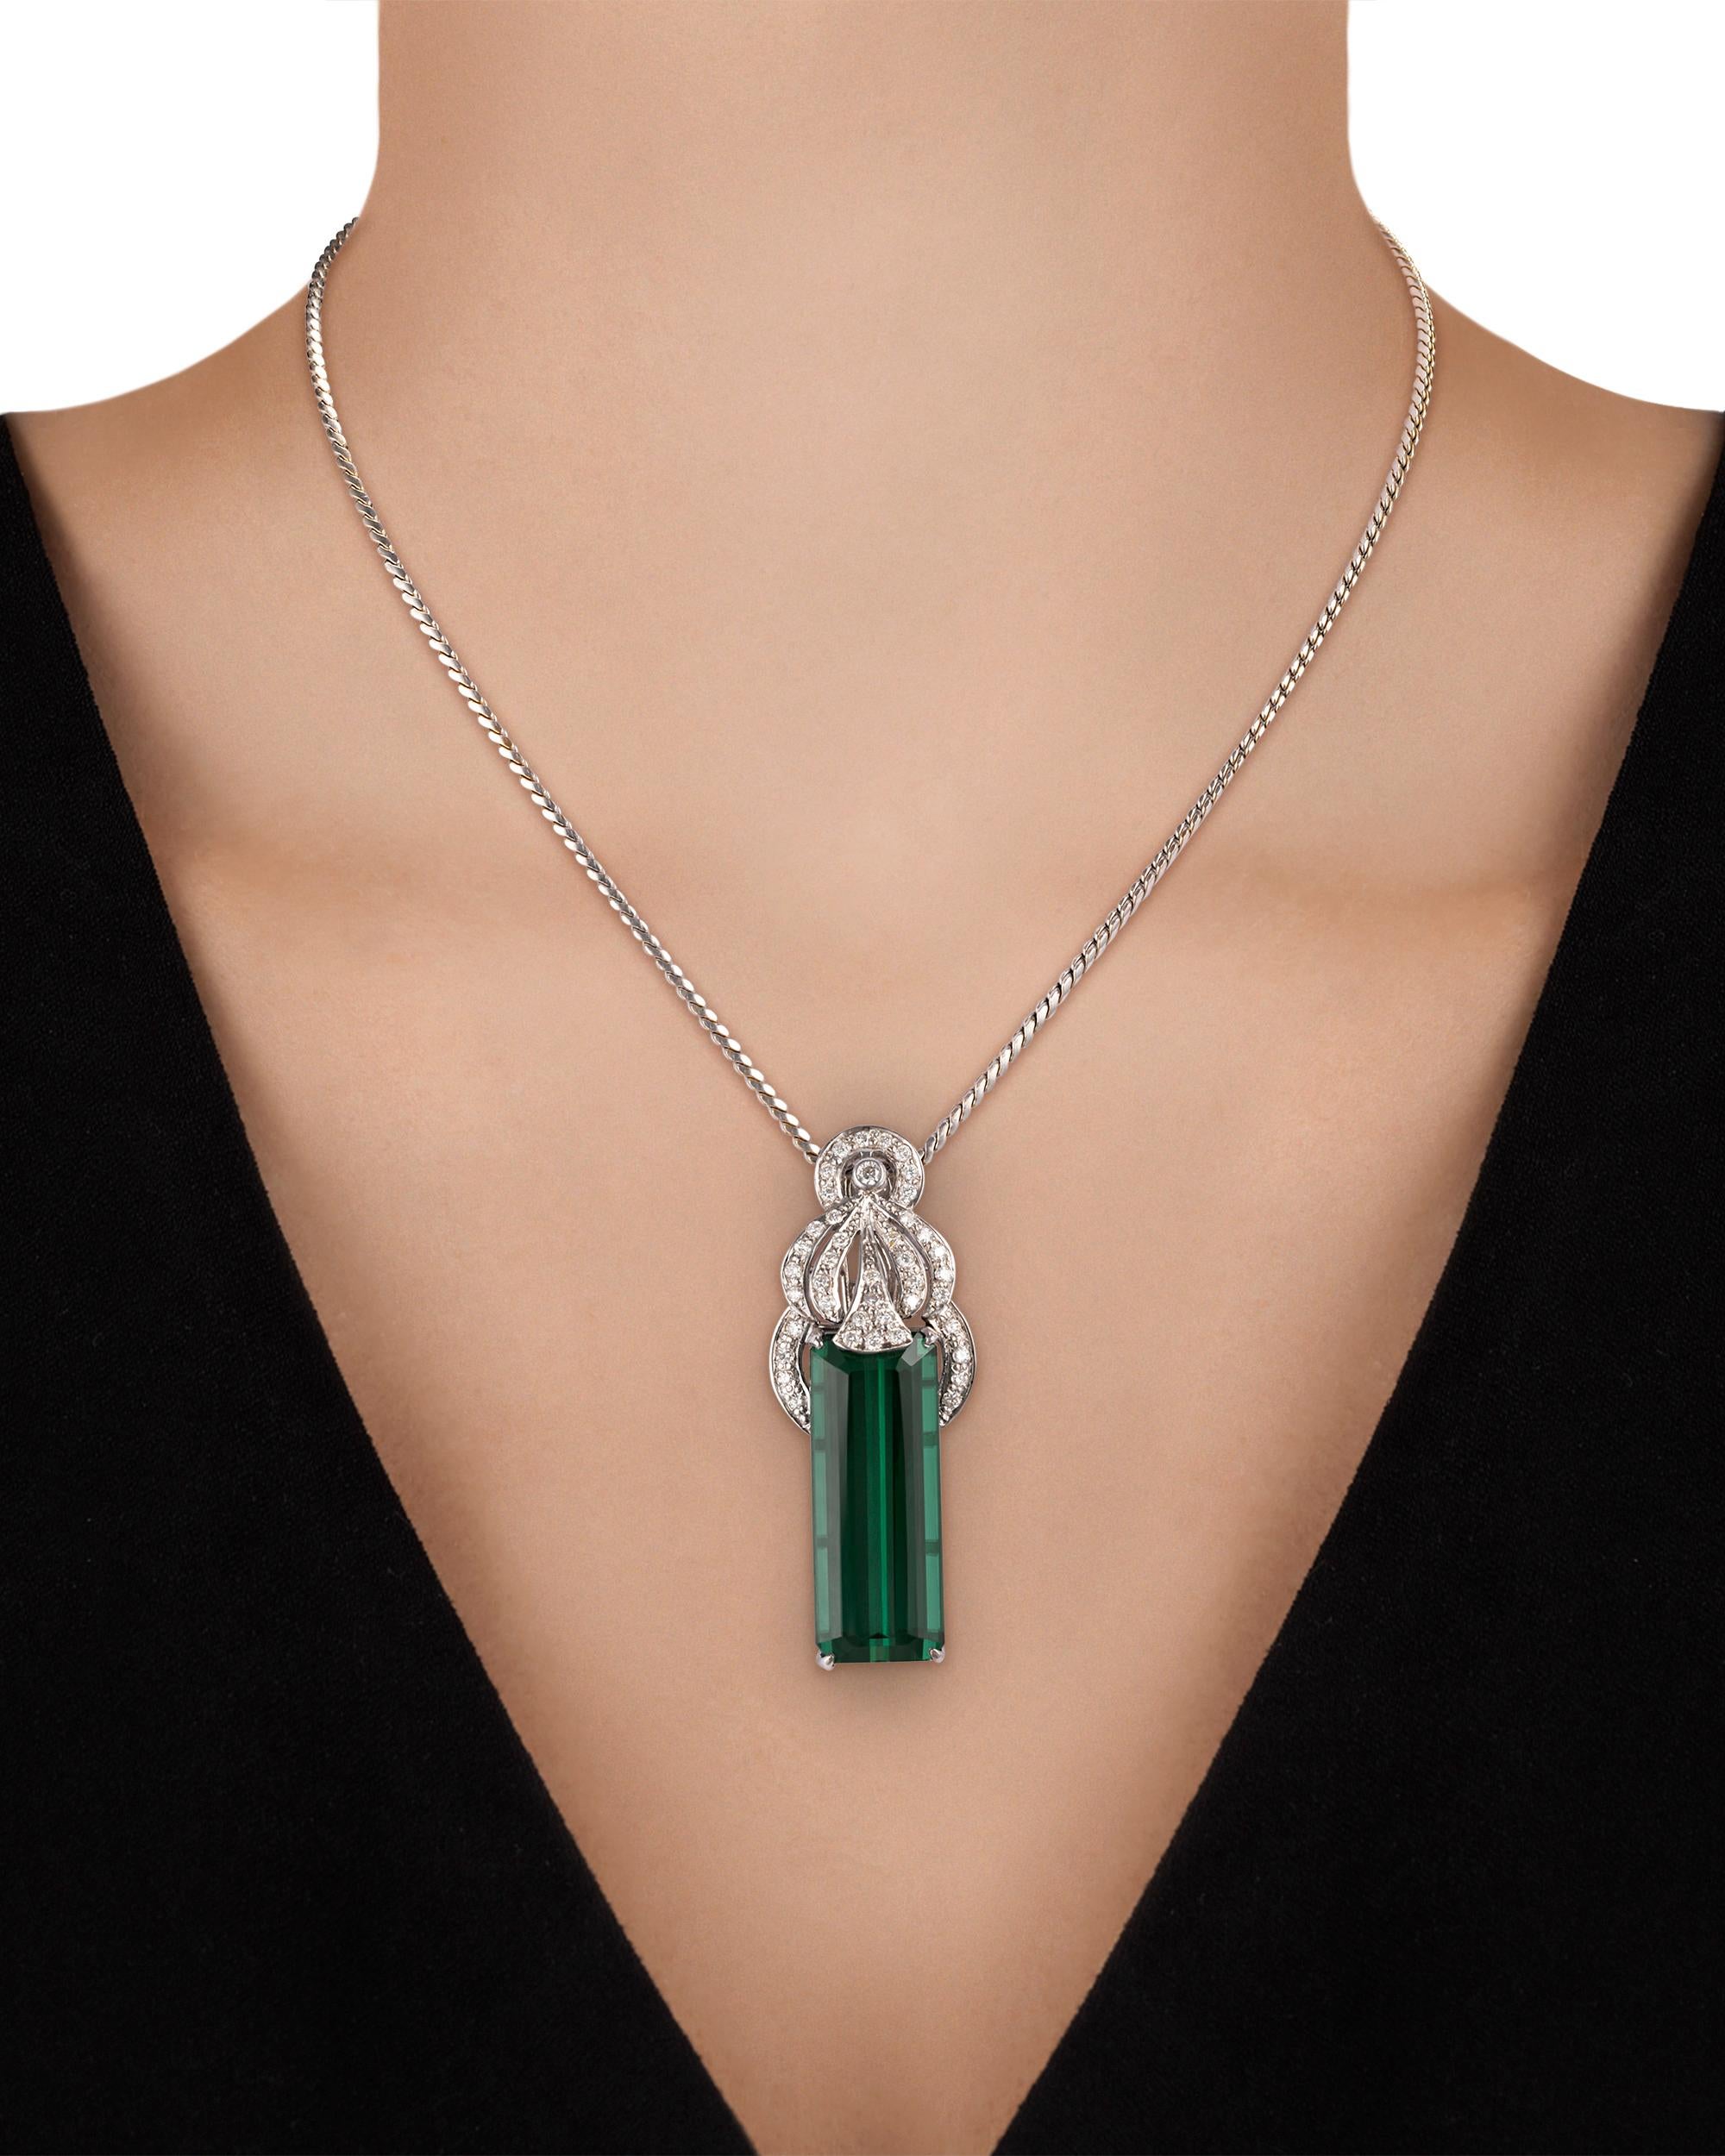 The emerald-cut tourmaline in this pendant weighs a monumental 37.63 carats and displays a rich green hue that rivals that of an emerald. The classic gem is set in platinum with diamonds totaling approximately 1.50 carats.

Pendant: 2